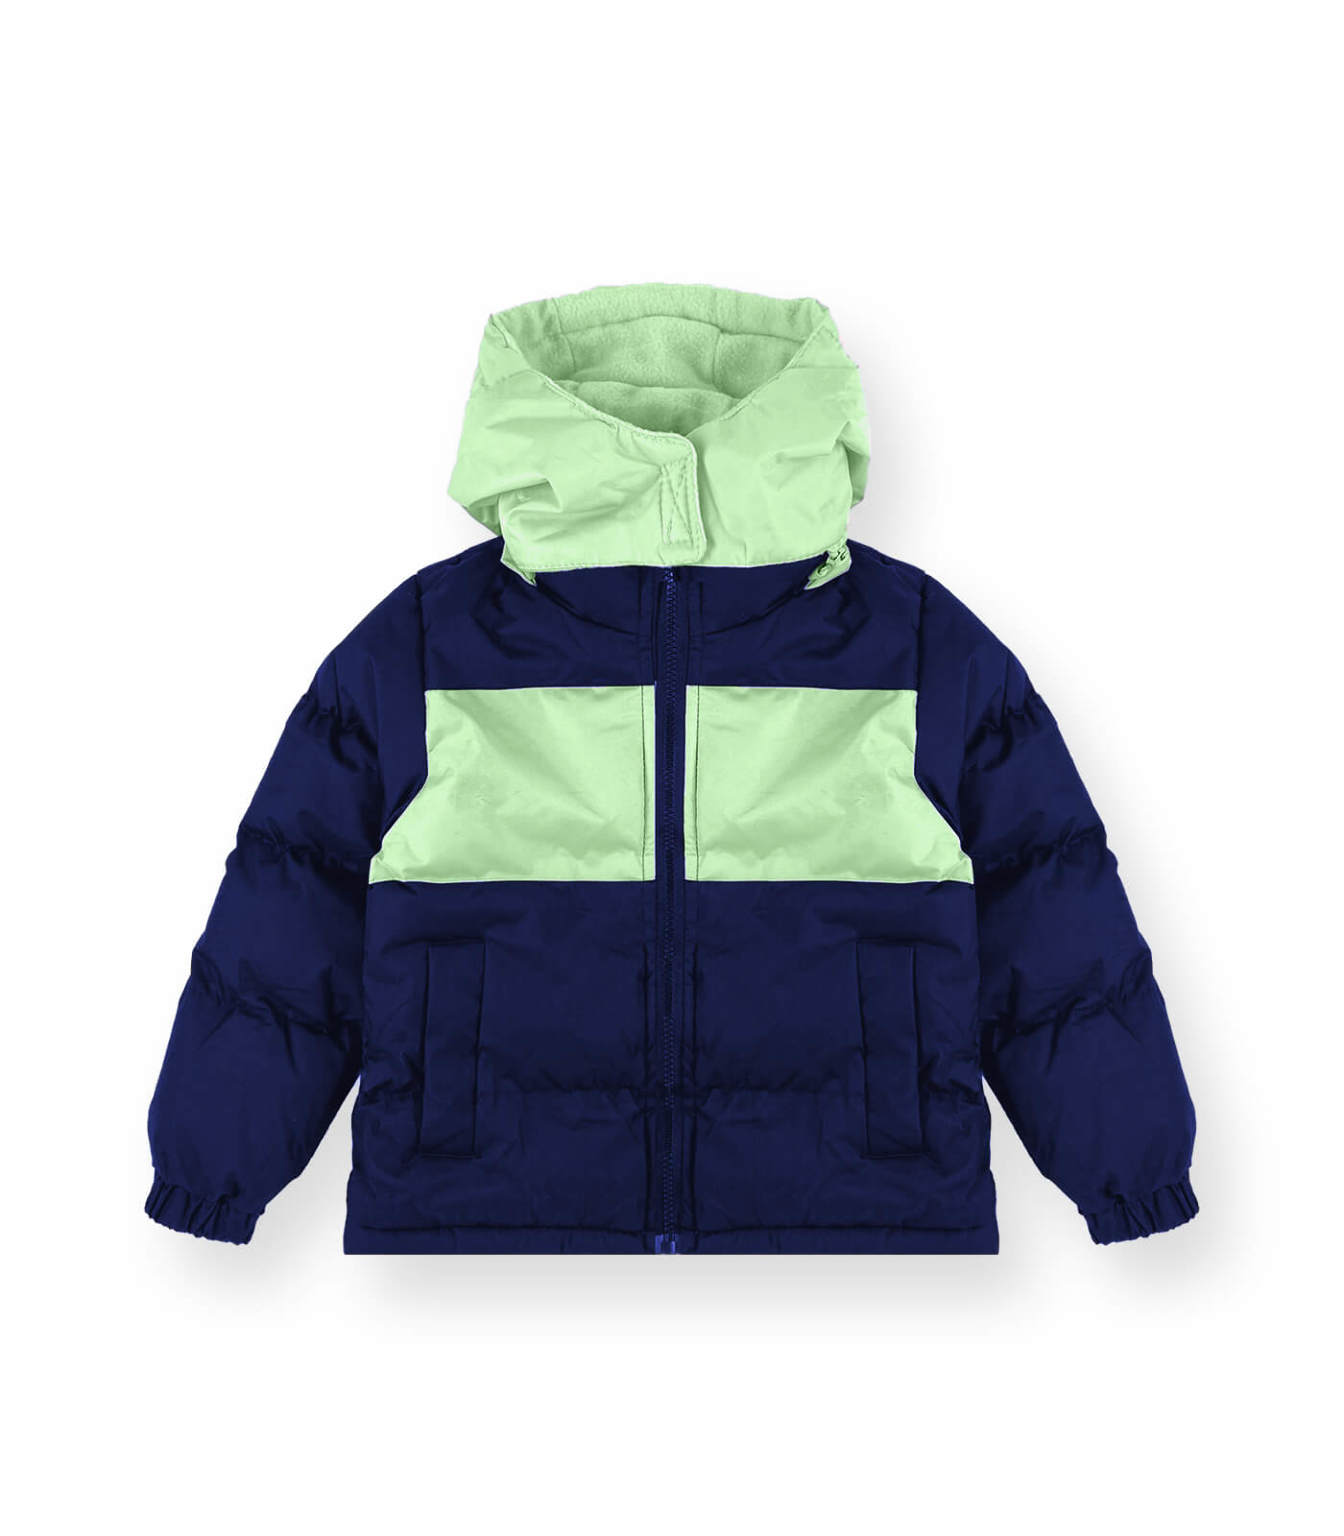 Boys' Puffer Jacket - 2T, 4-7/8, Assorted Color Block, Hooded